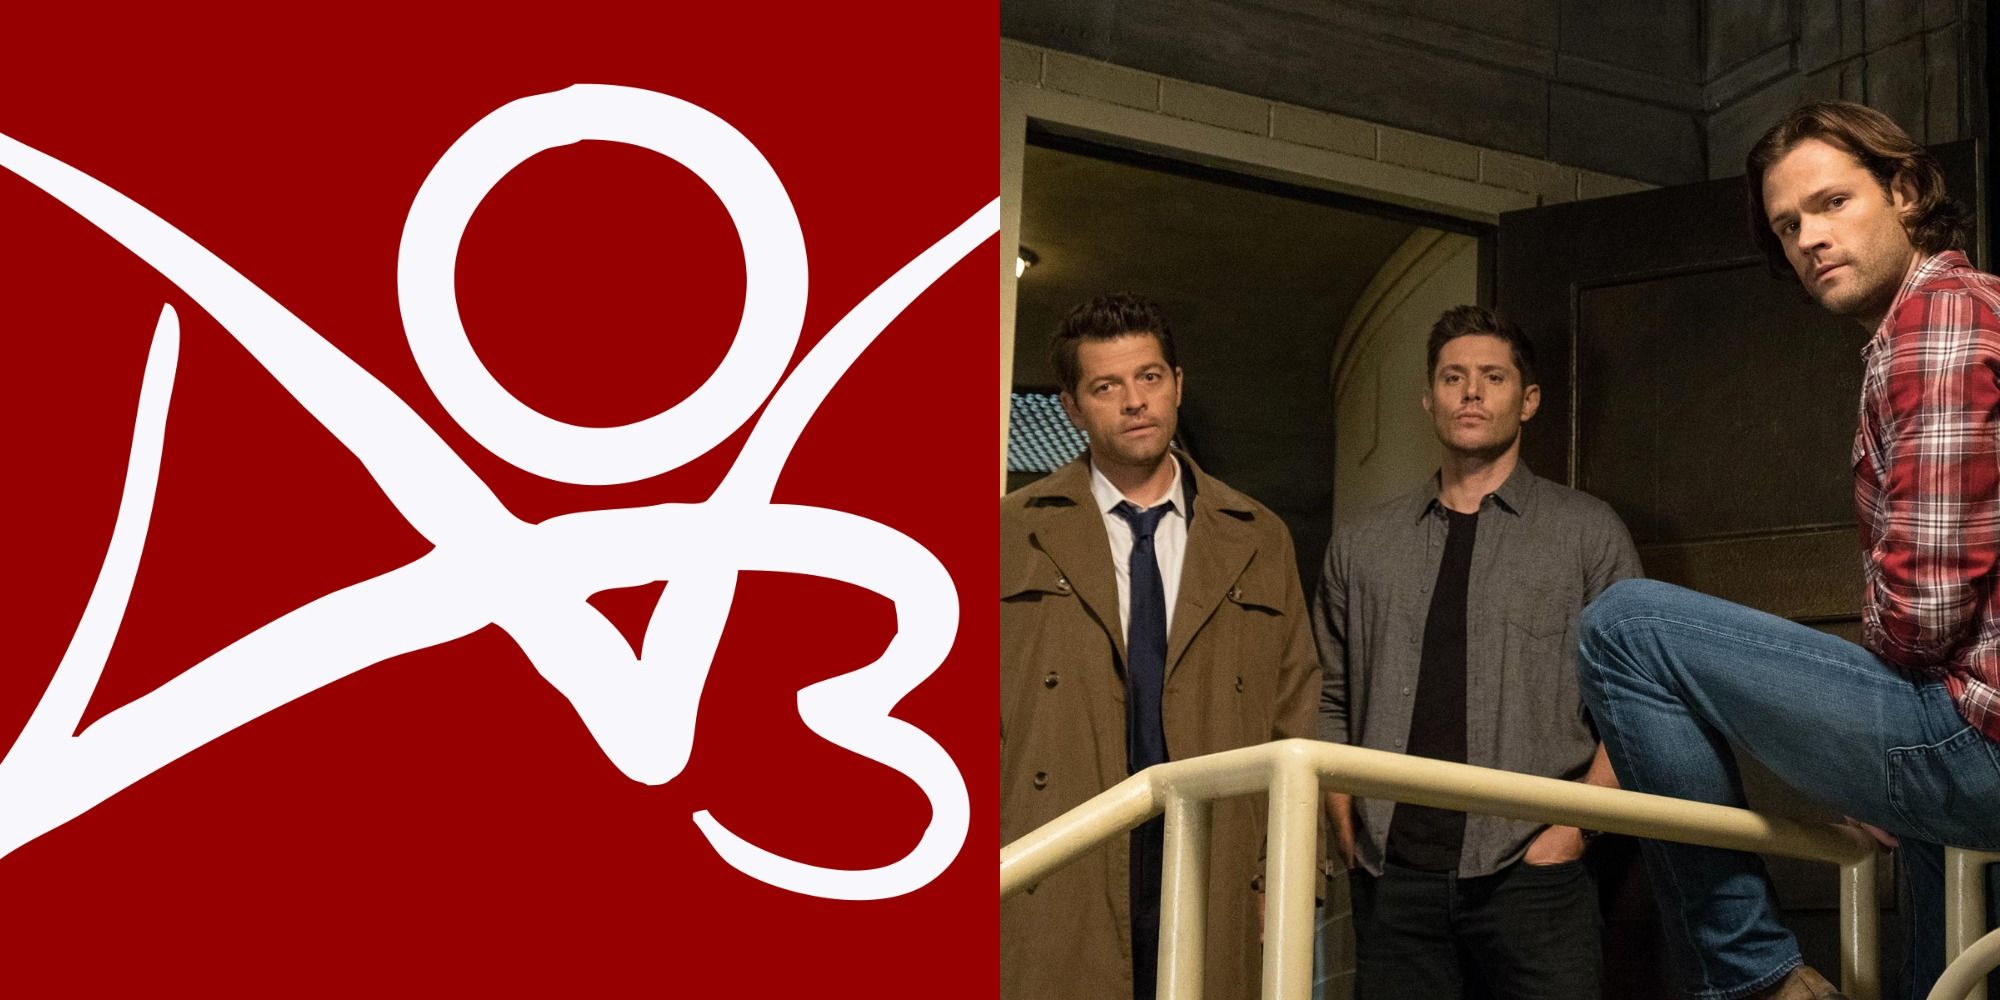 Split image of the AO3 Symbol and Dean, Cas and Sam from Supernatural